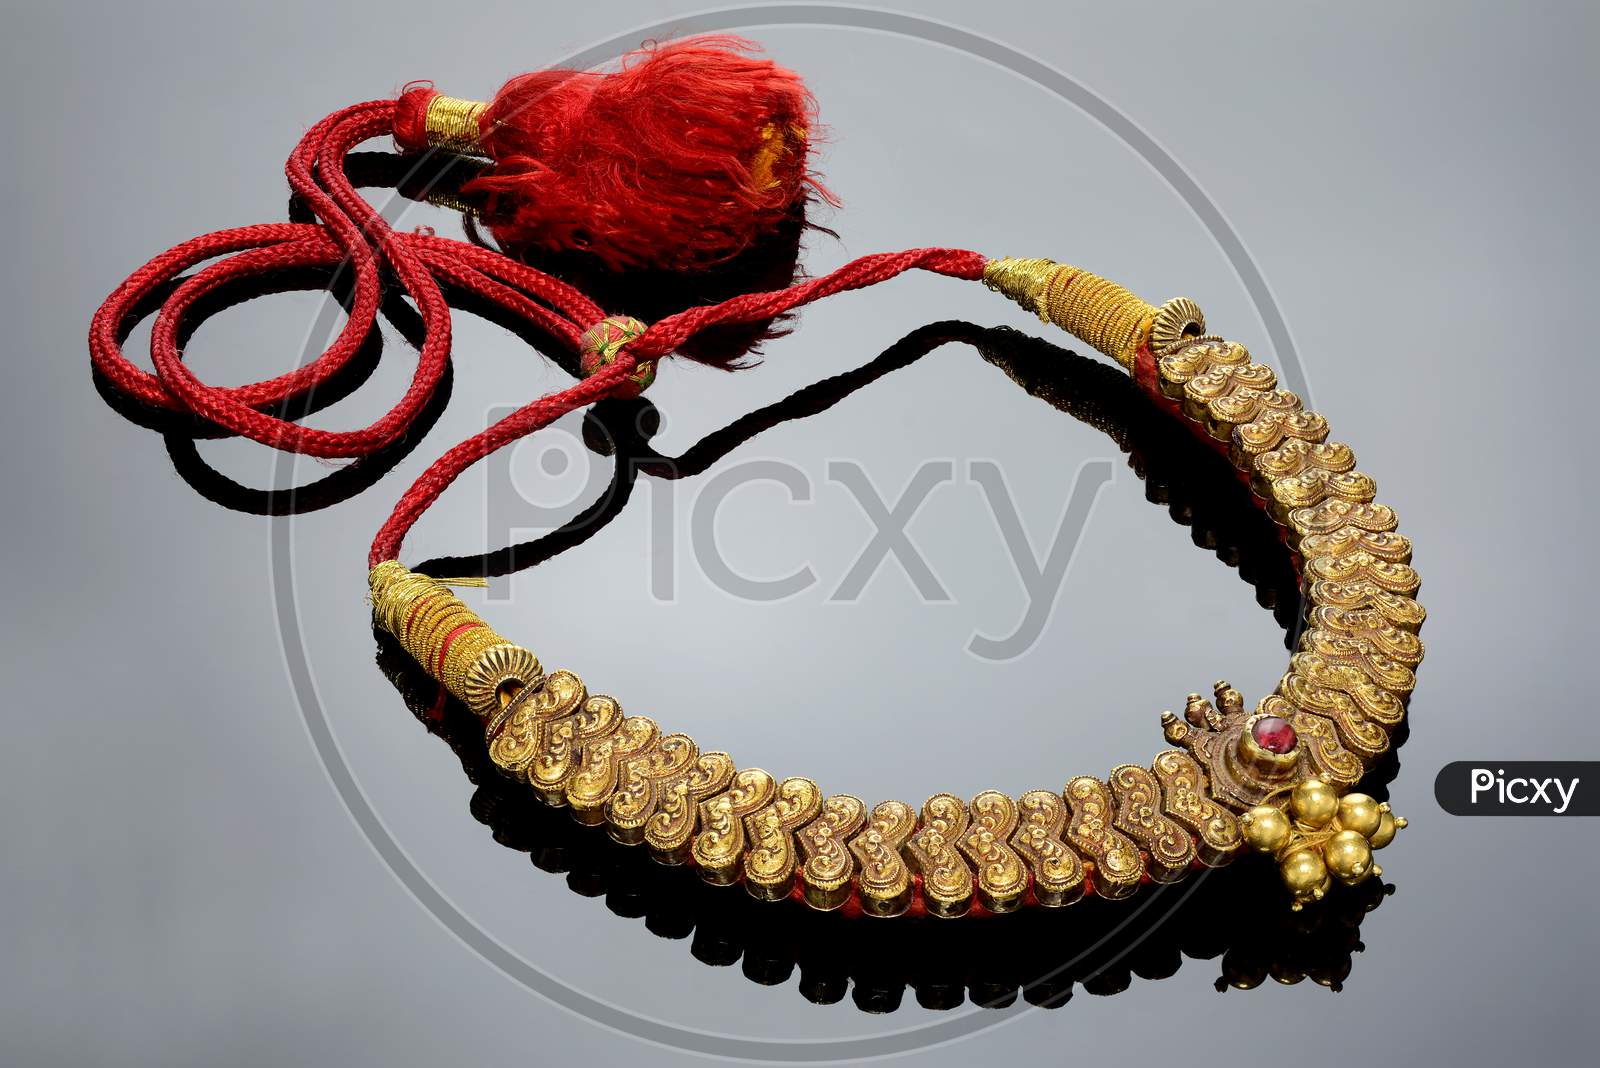 Indian Jewellery Necklace  Designs Over Isolated Background